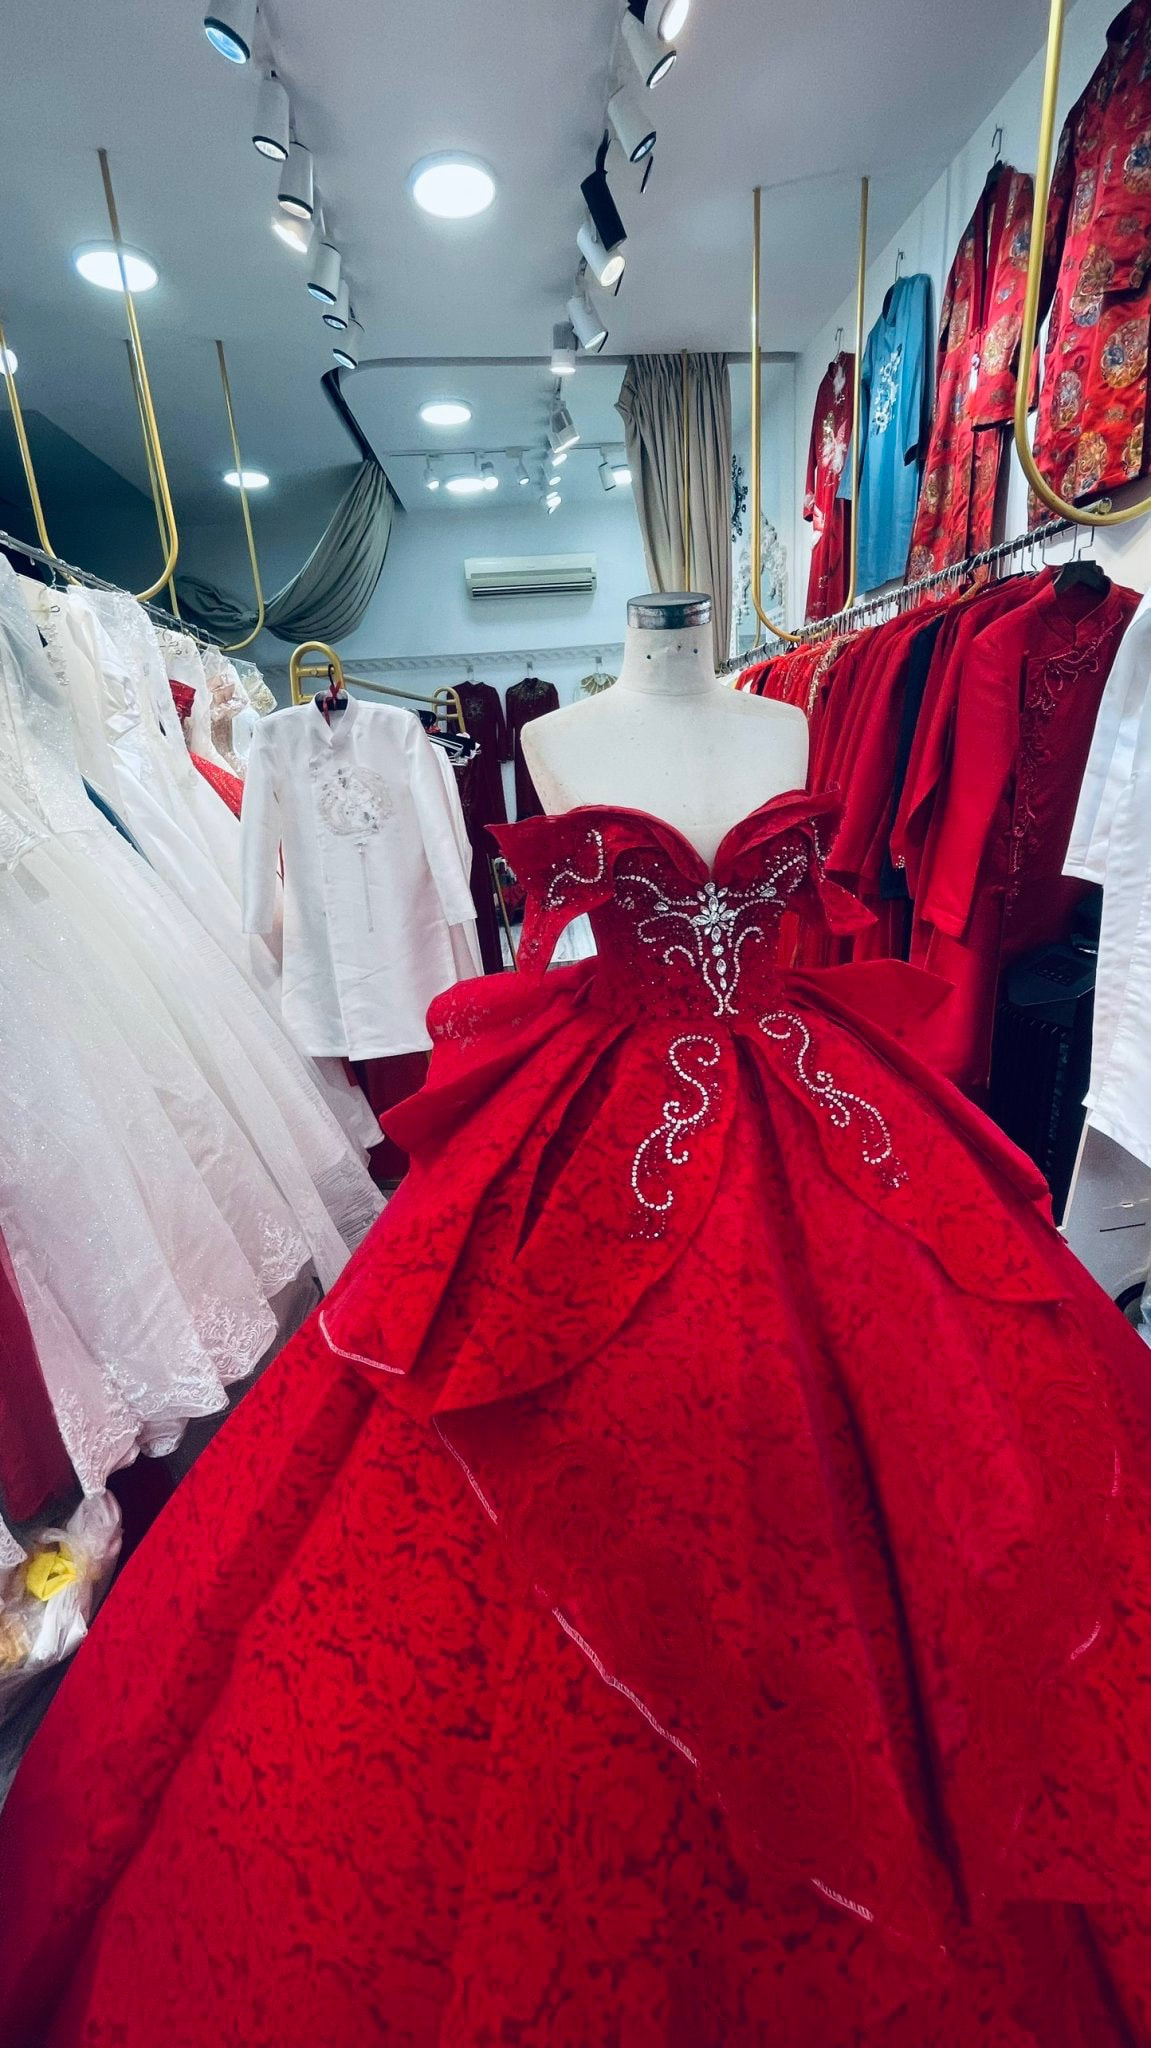 DEBUT/PROM GOWN FOR SALE, Women's Fashion, Dresses & Sets, Evening dresses  & gowns on Carousell